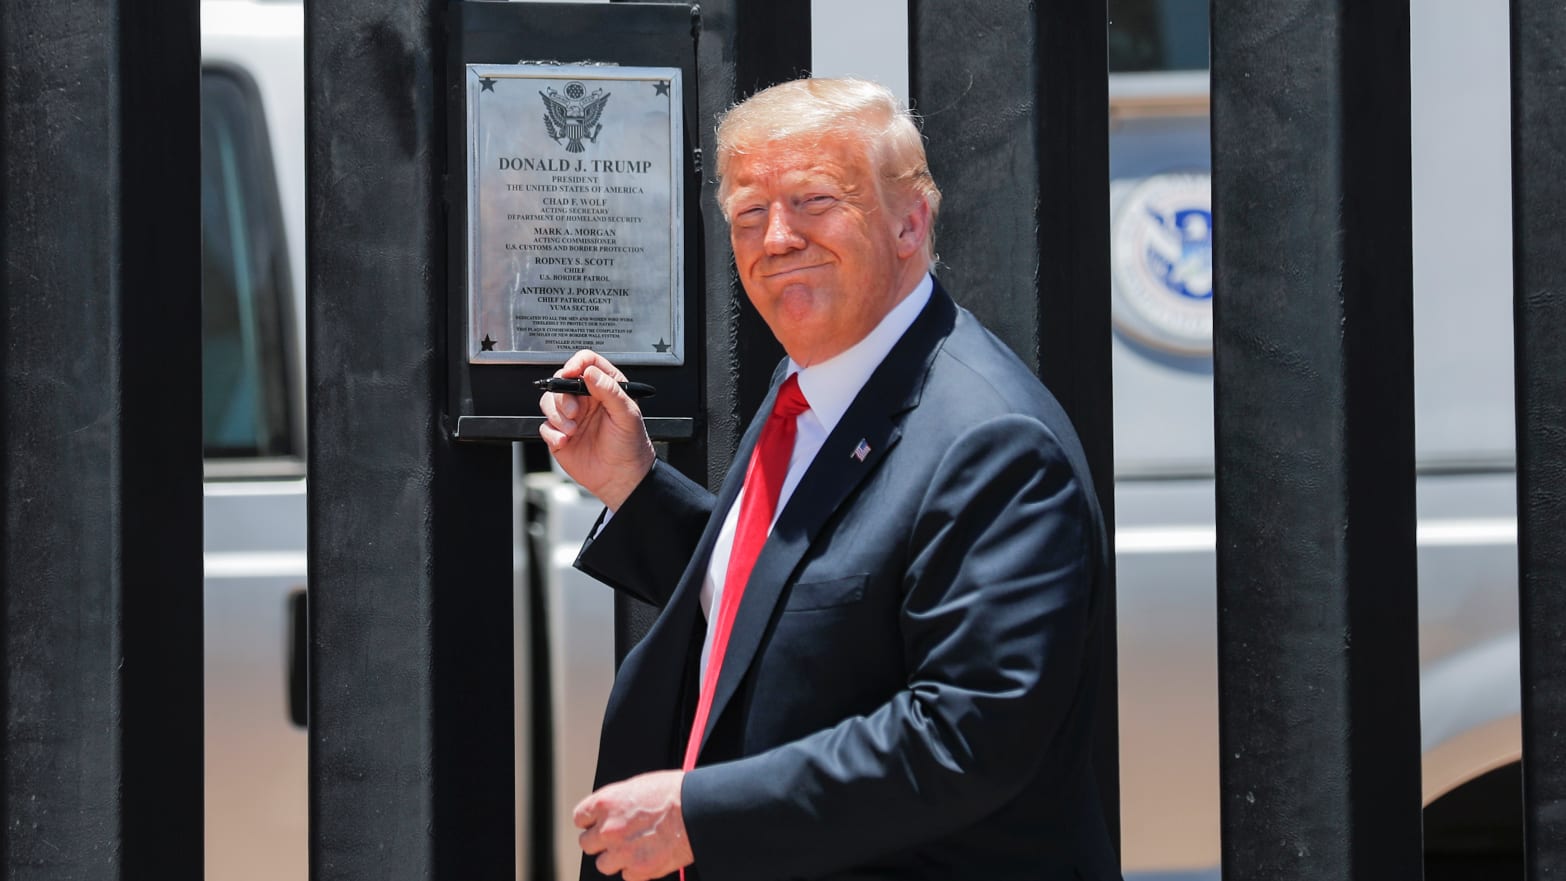 President Donald Trump smiles as he prepares to autograph a plaque commemorating the construction of the 200th mile of border wall while visiting the wall on the U.S.-Mexico border in San Luis, Arizona, U.S., June 23, 2020